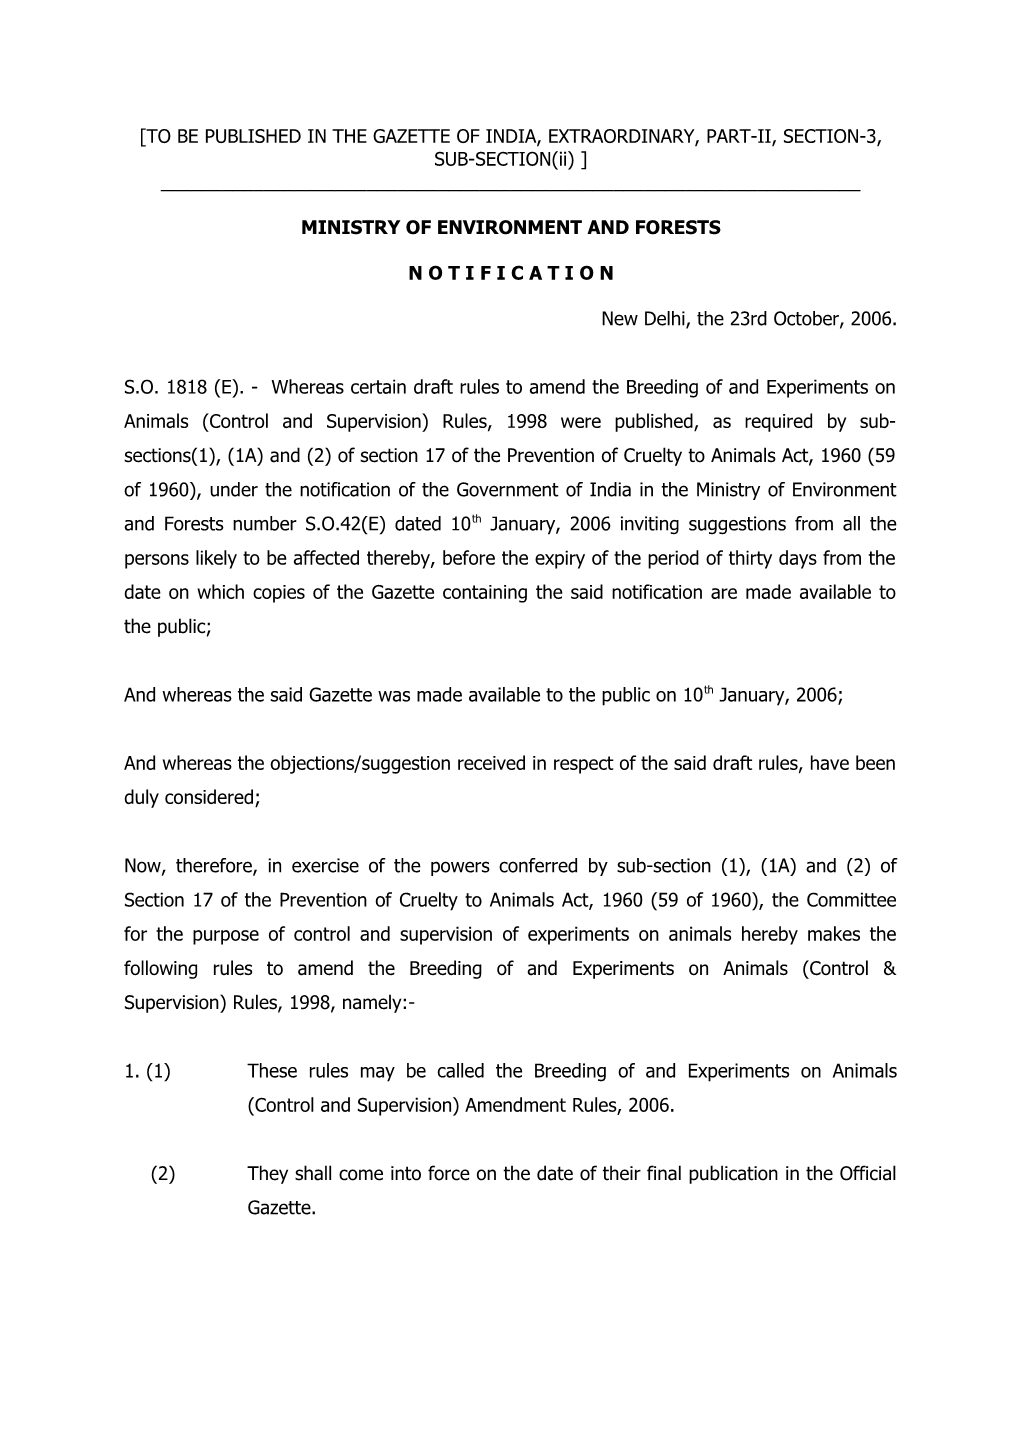 TO BE PUBLISHED in PART-II, SECTION-3, SUB-SECTION(Ii) of the EXTRAORDINARY GAZETTE of INDIA